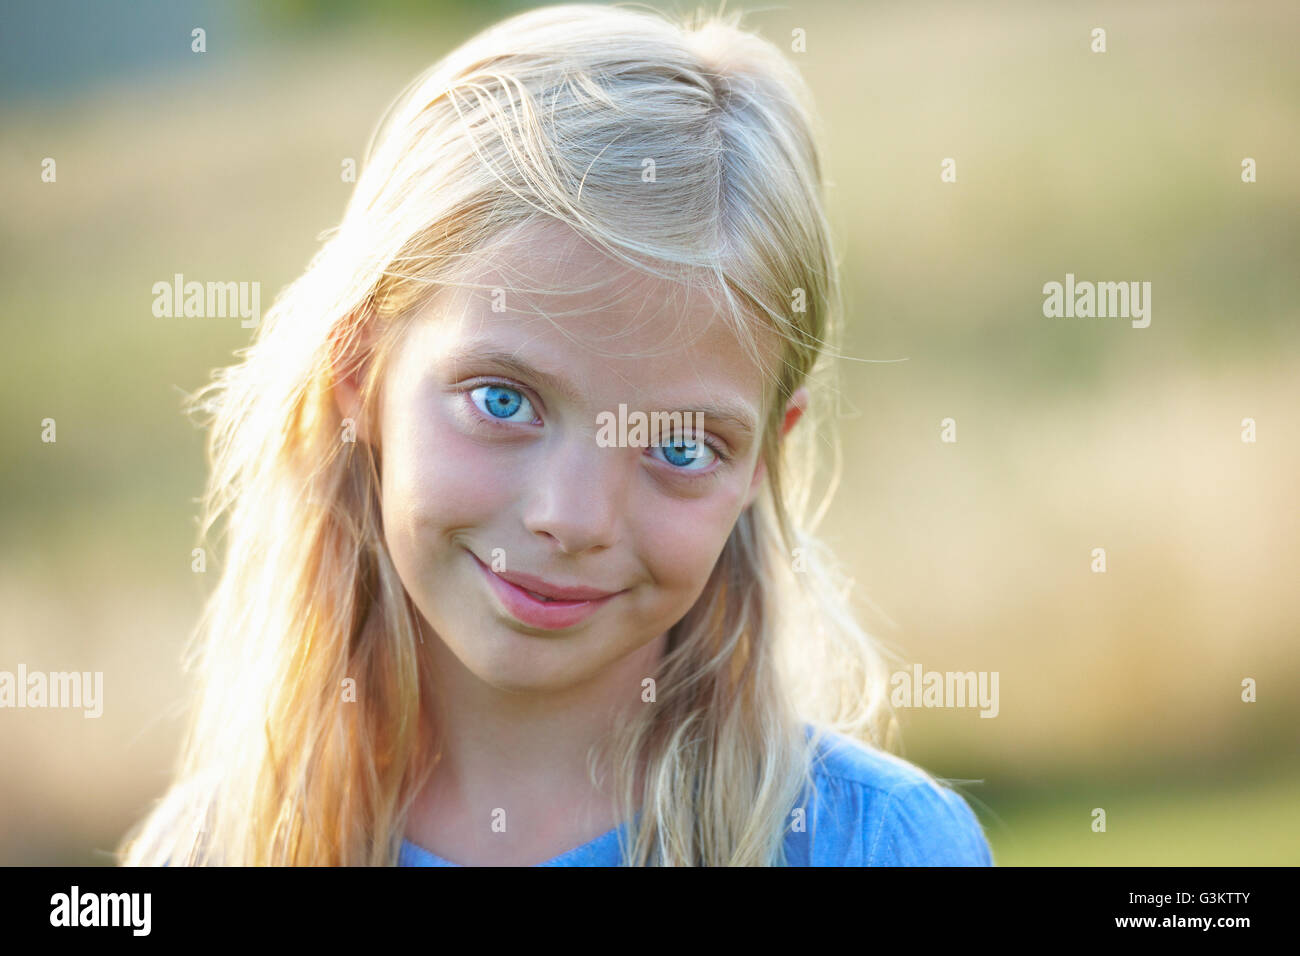 Portrait of young girl in field Banque D'Images